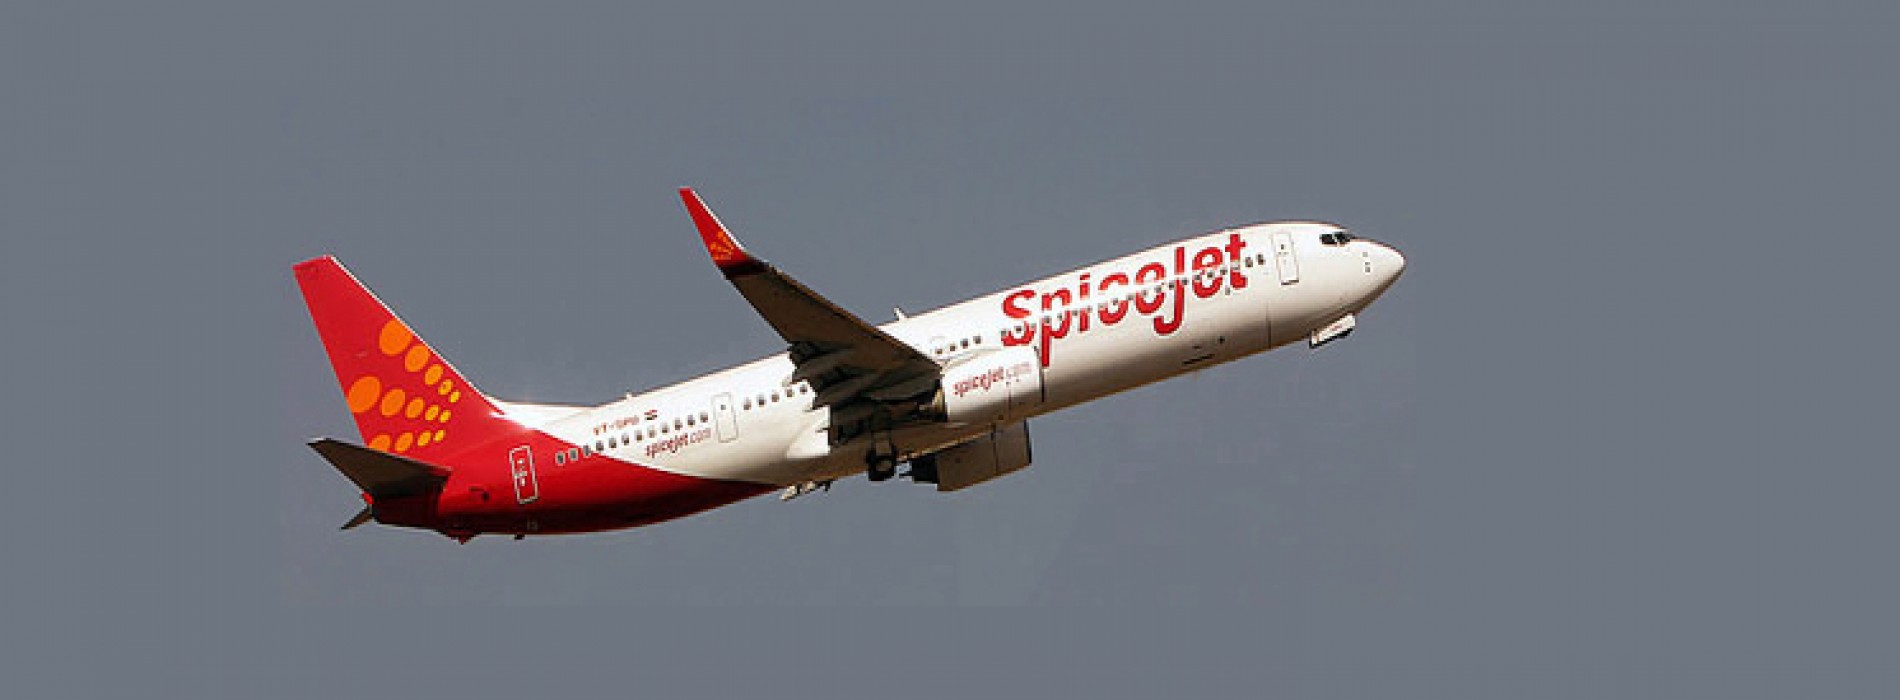 SpiceJet offering airfares starting at Rs 716